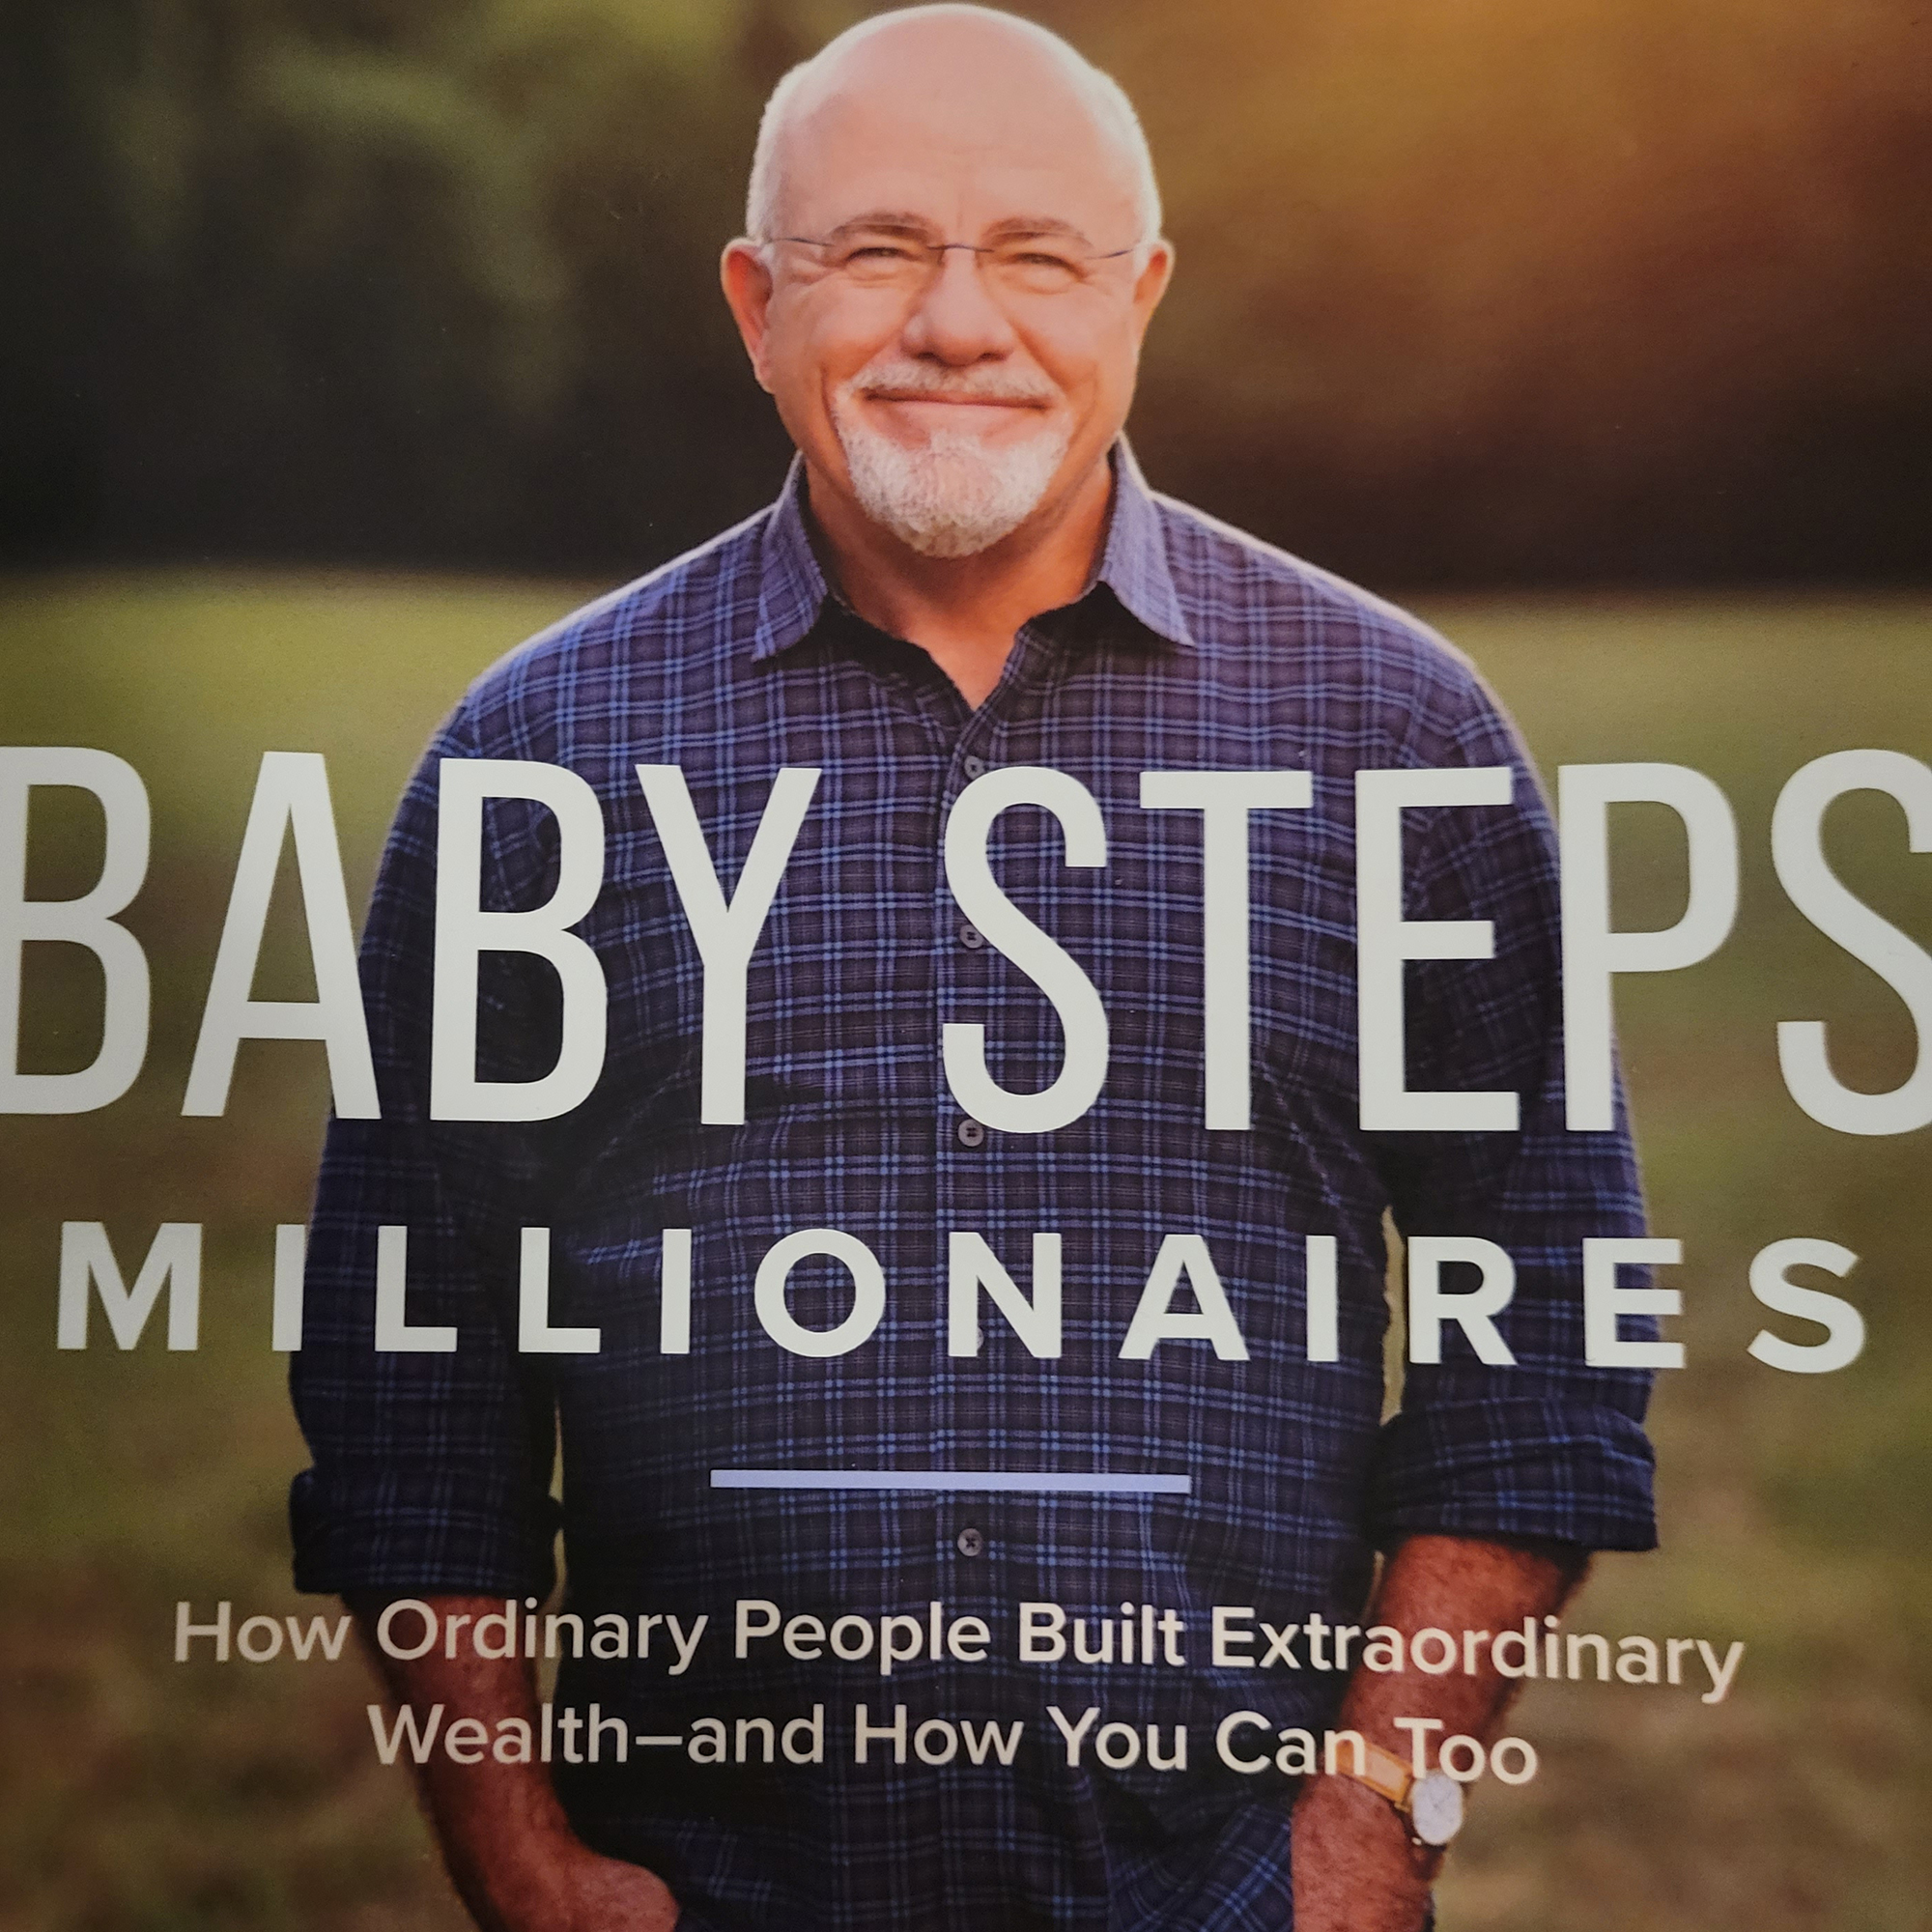 Baby Steps Millionaires, Dave Ramsey